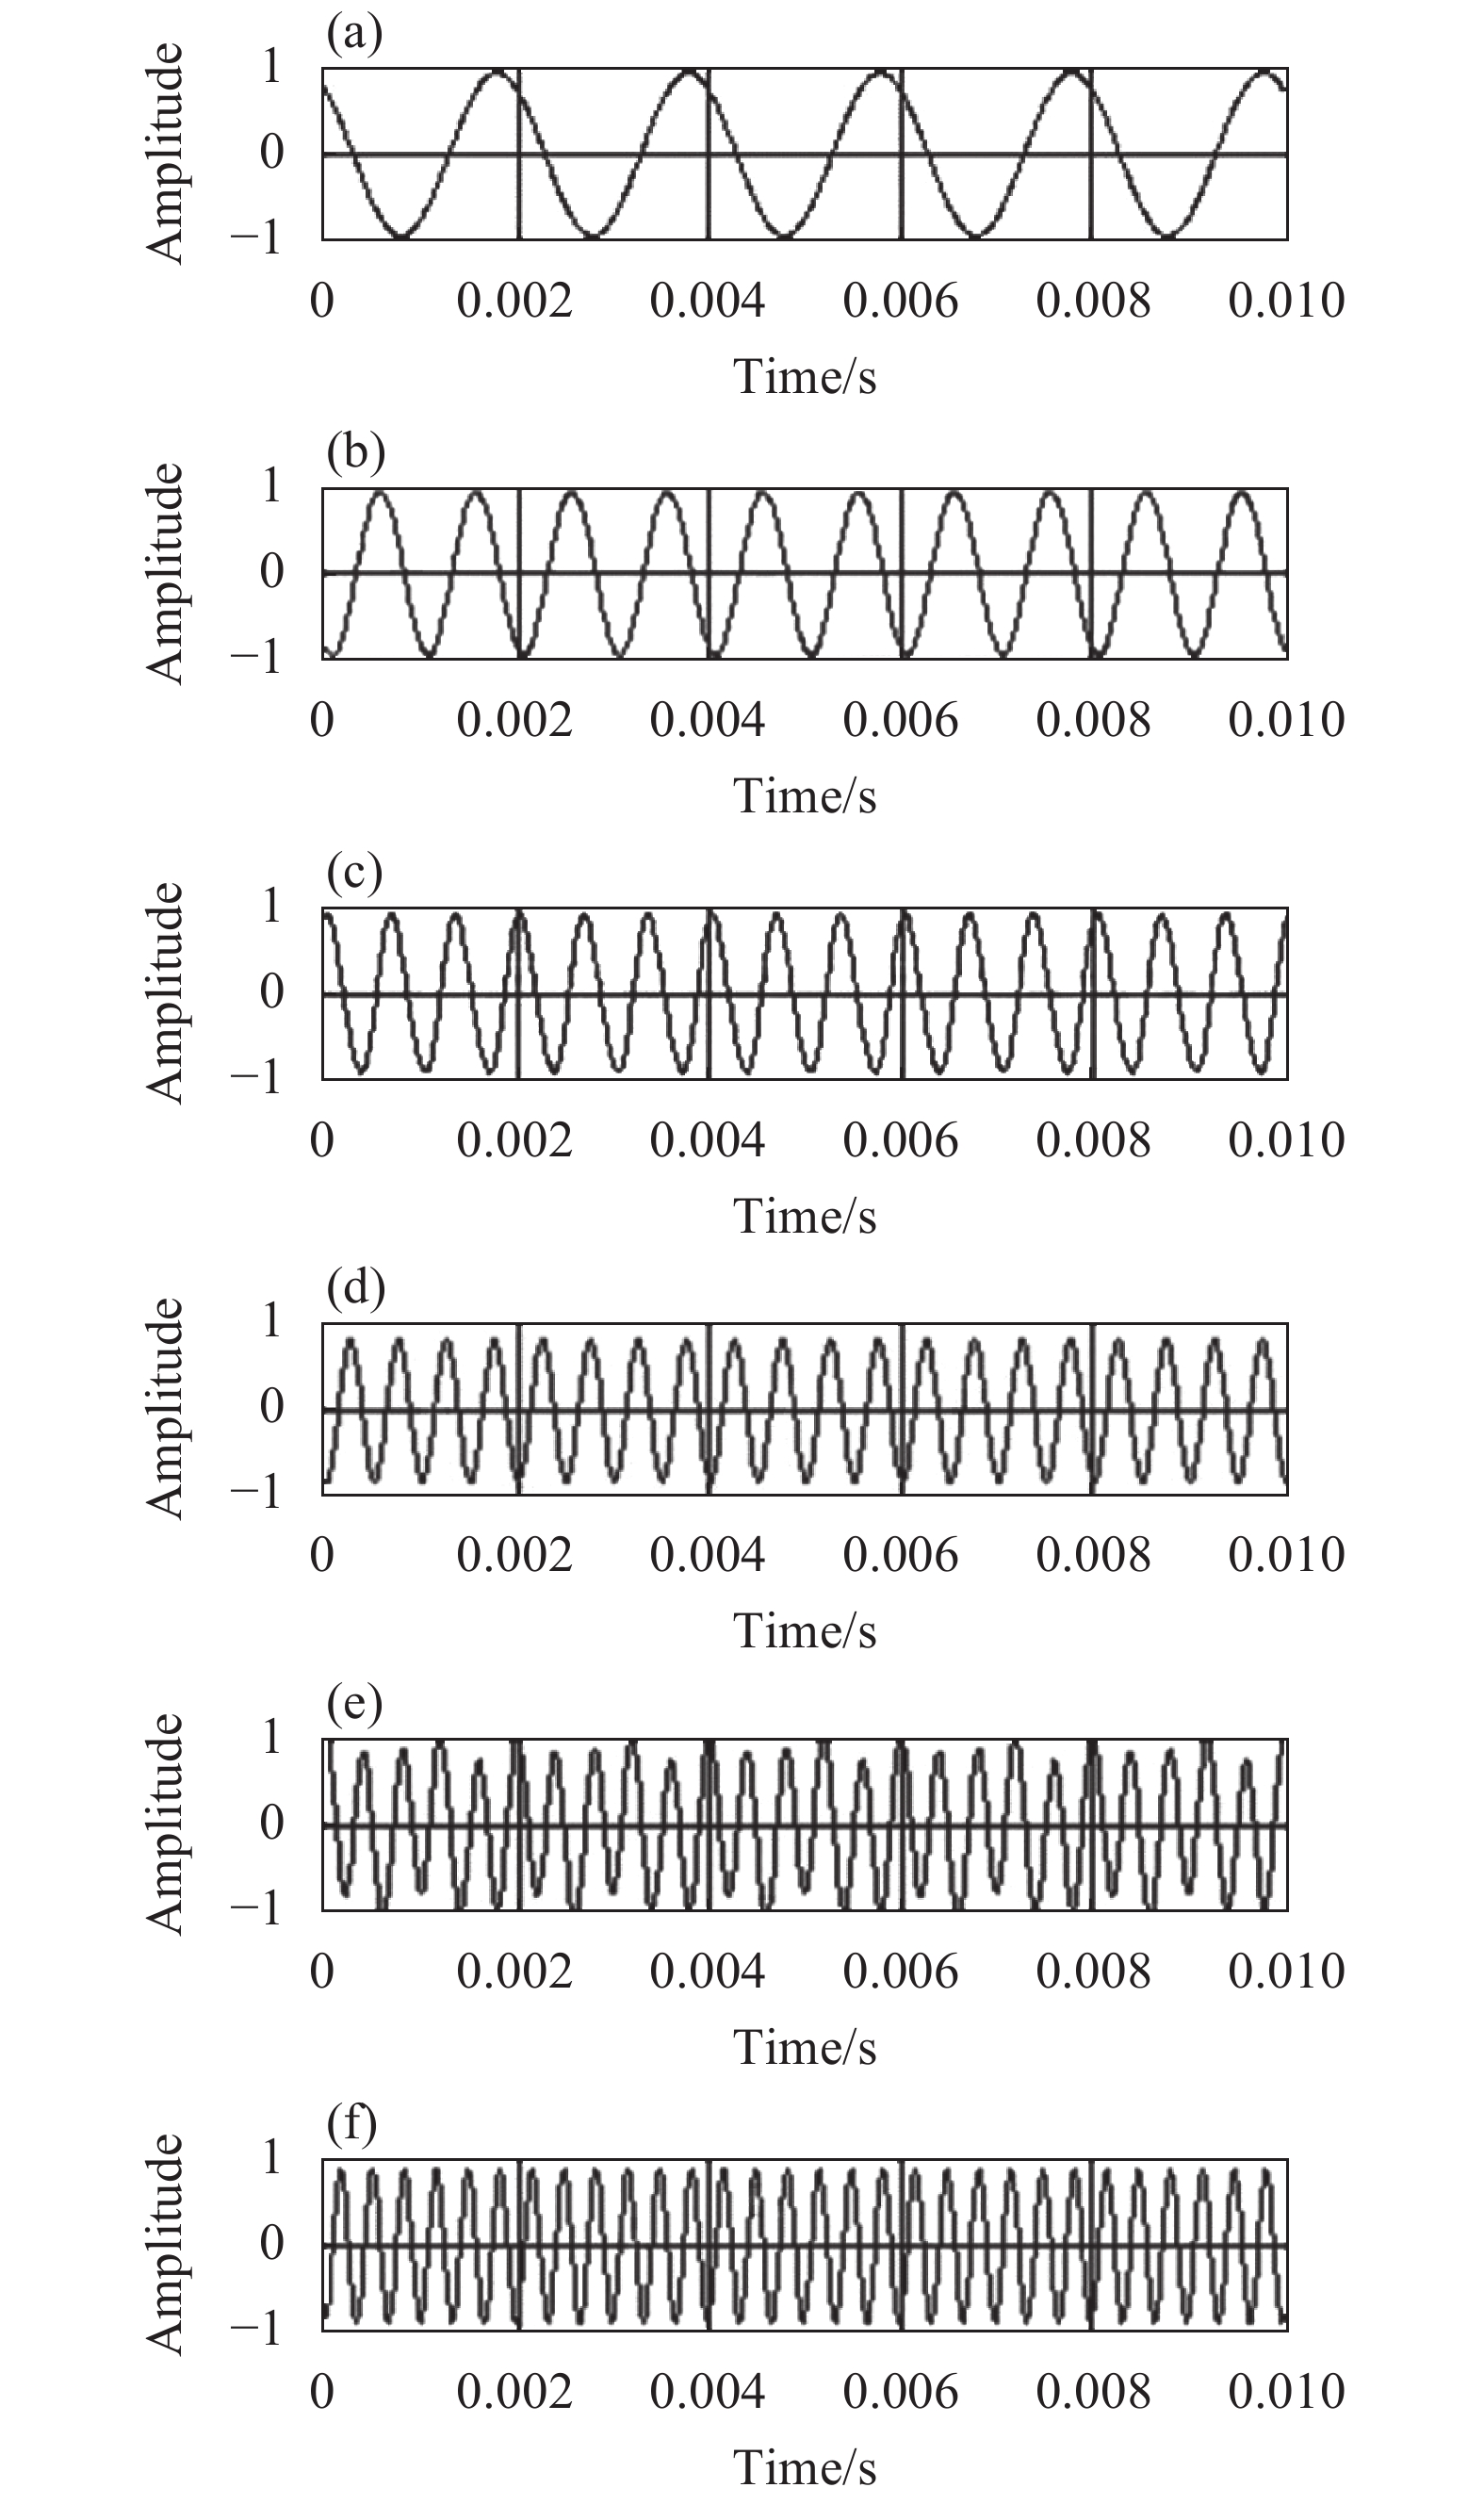 Single frequency signal simulation of different frequencies. (a) The frequency is 500 Hz; (b) The frequency is 1 000 Hz; (c) The frequency is 1 500 Hz; (d) The frequency is 2 000 Hz; (e) The frequency is 2 500 Hz; (f) The frequency is 3 000 Hz